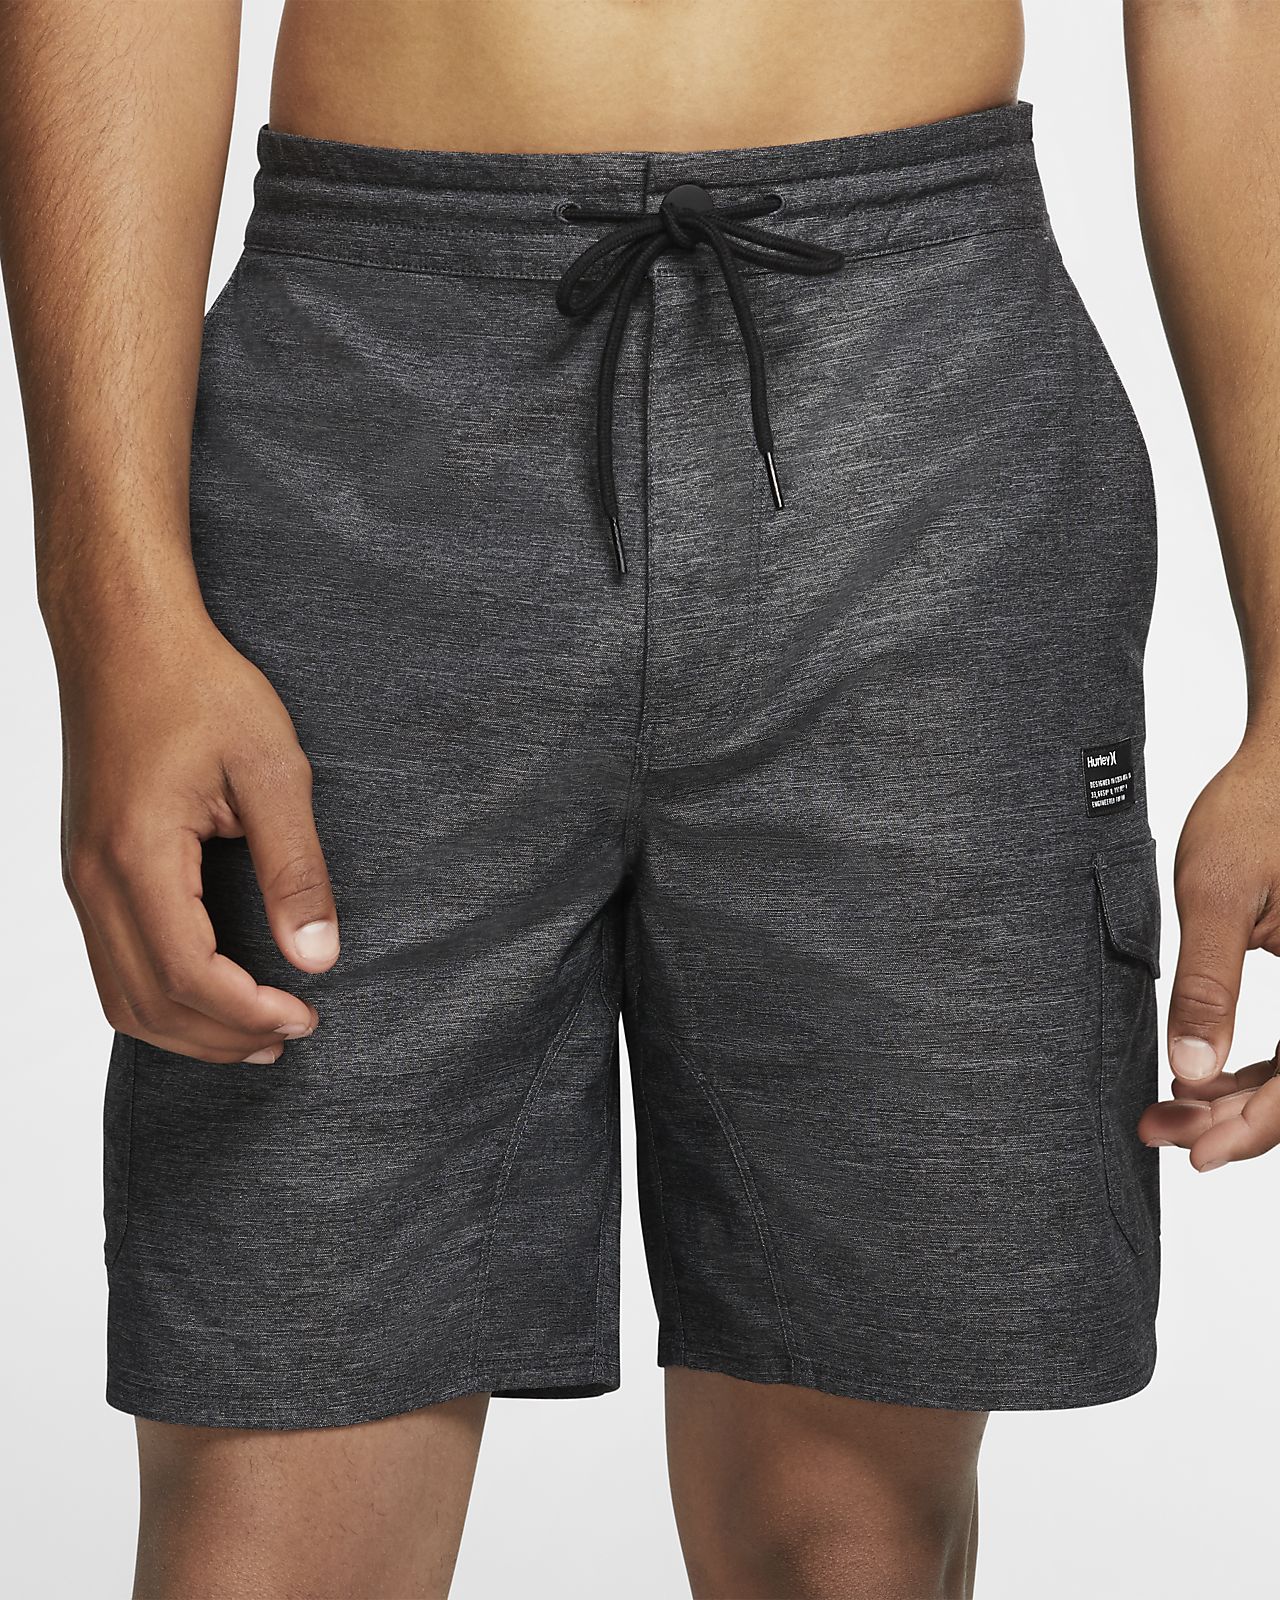 dri fit cargo shorts where can i buy 